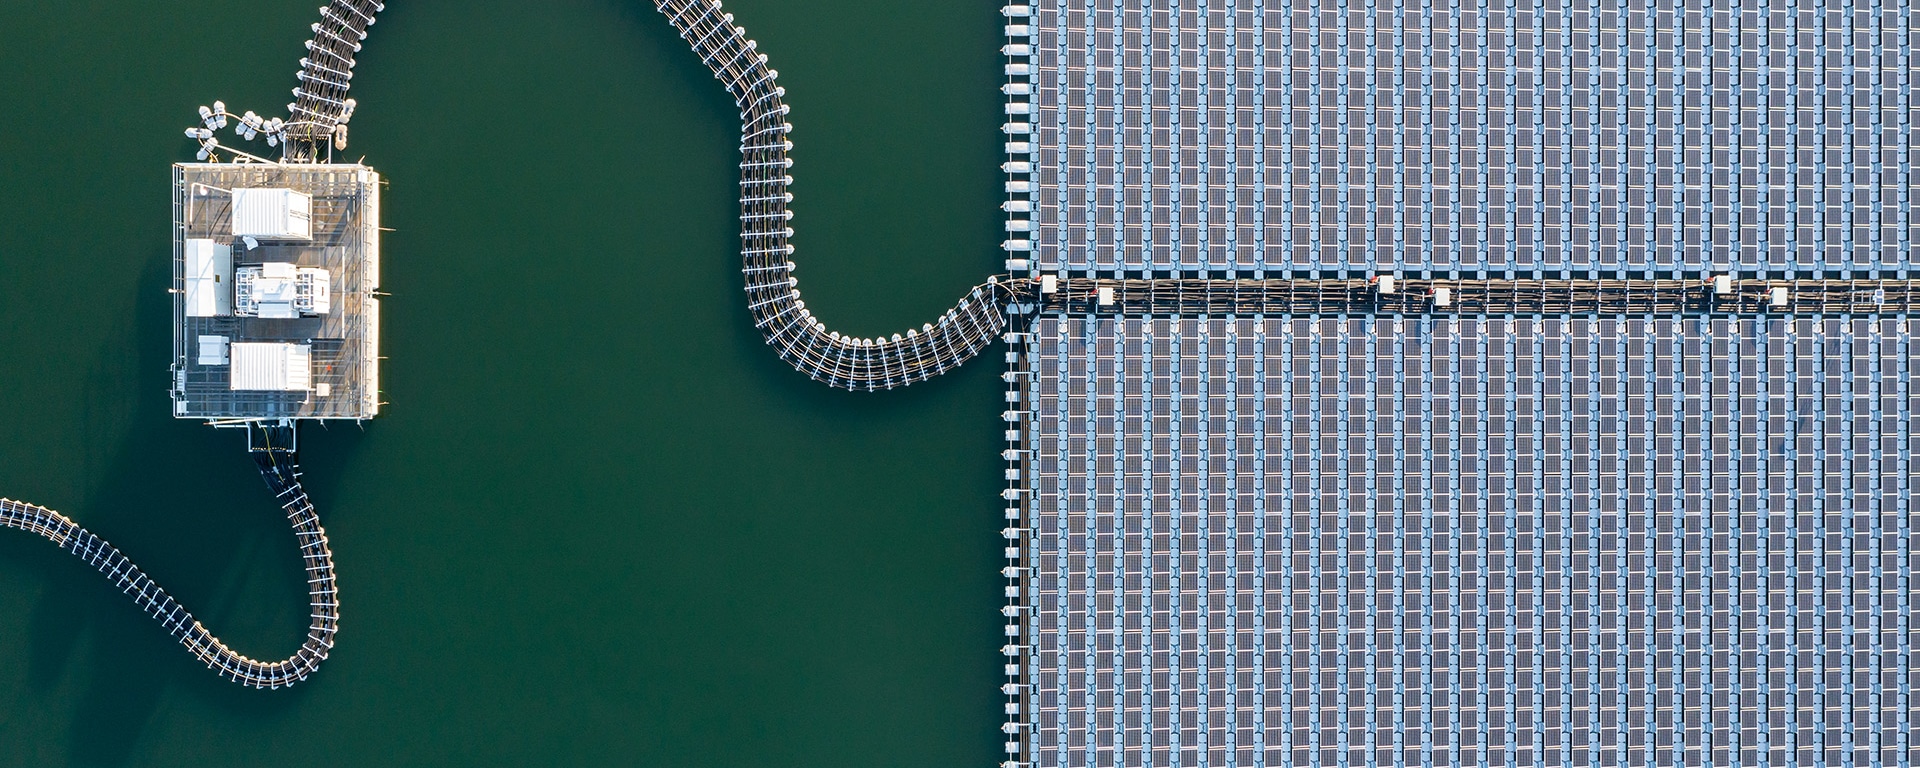 Aerial view of a man-made island - symbolic image to bridge the gap to dividends.